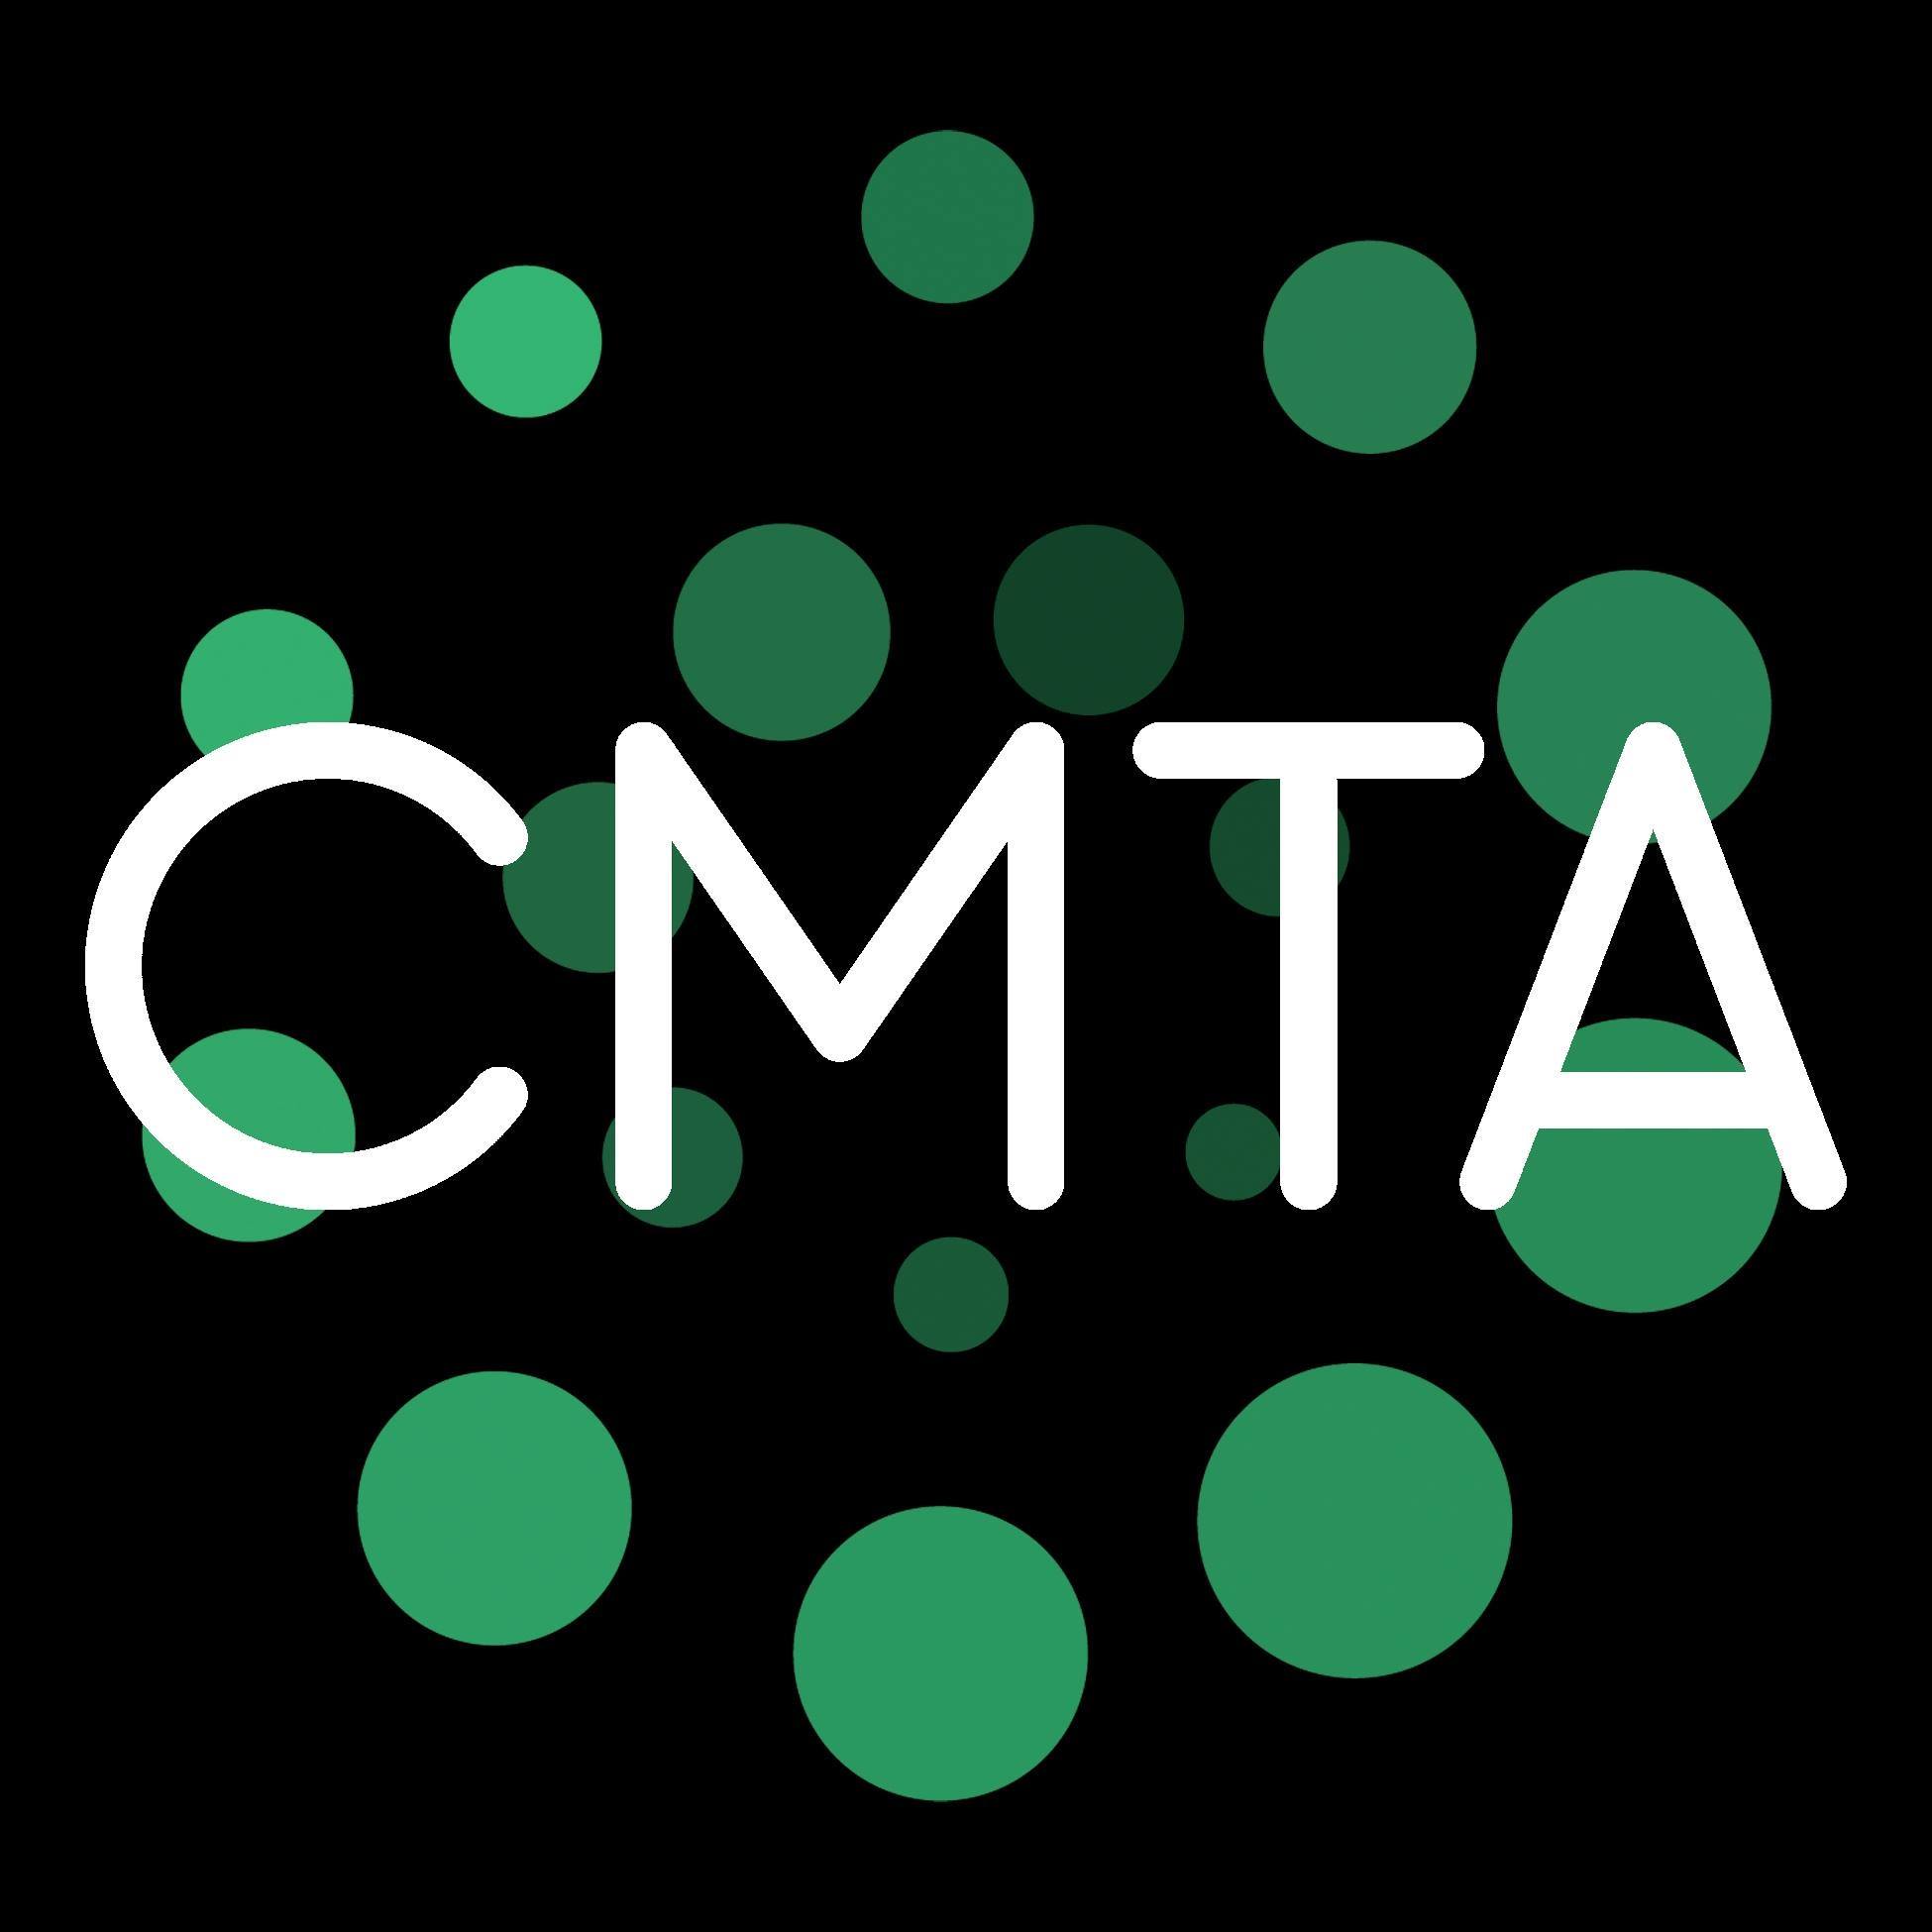 CMTA Consulting Engineers logo